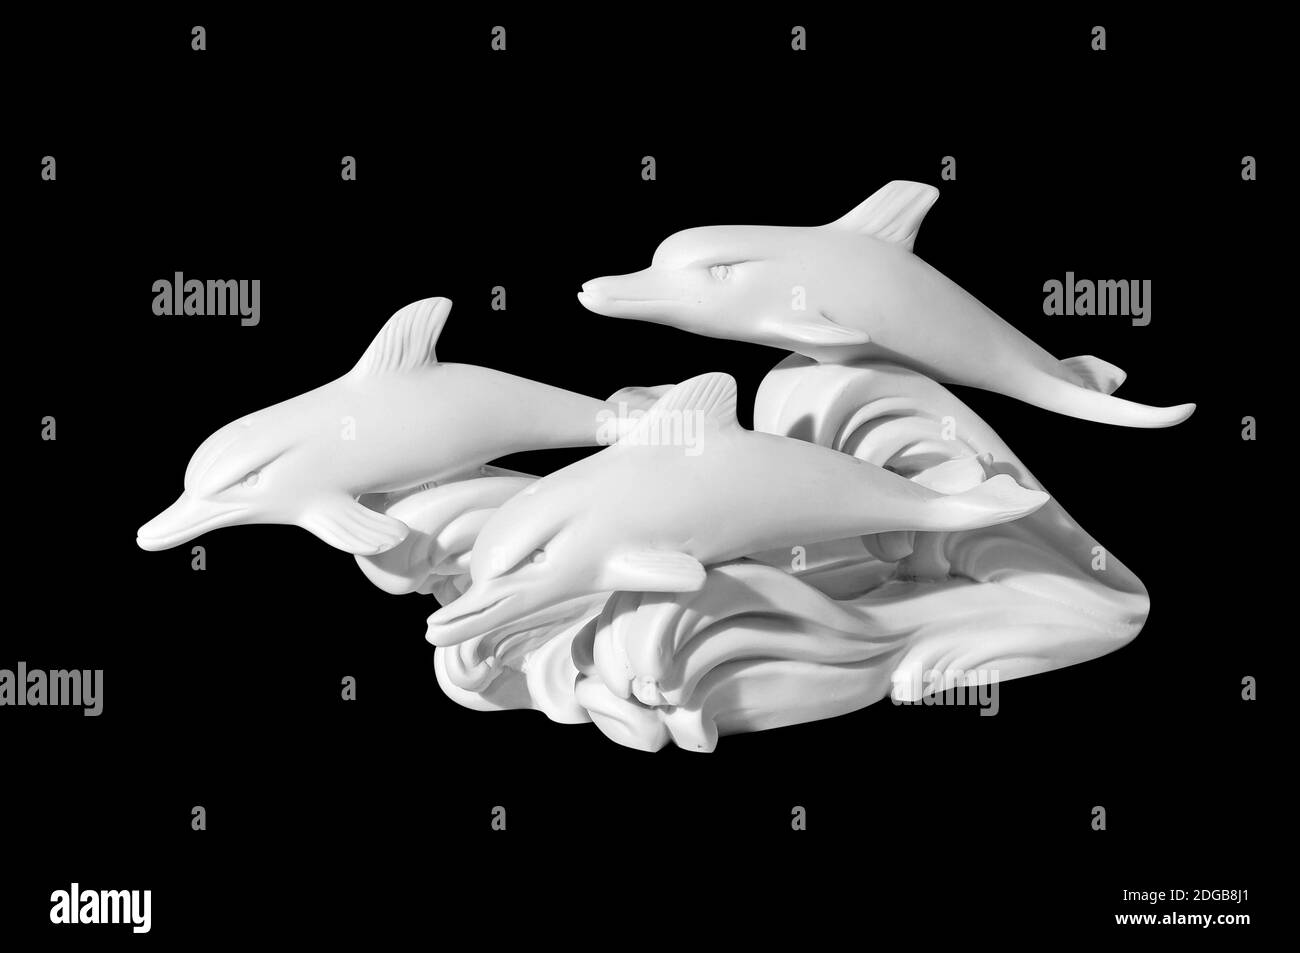 Statue of dolphins on a black background Stock Photo